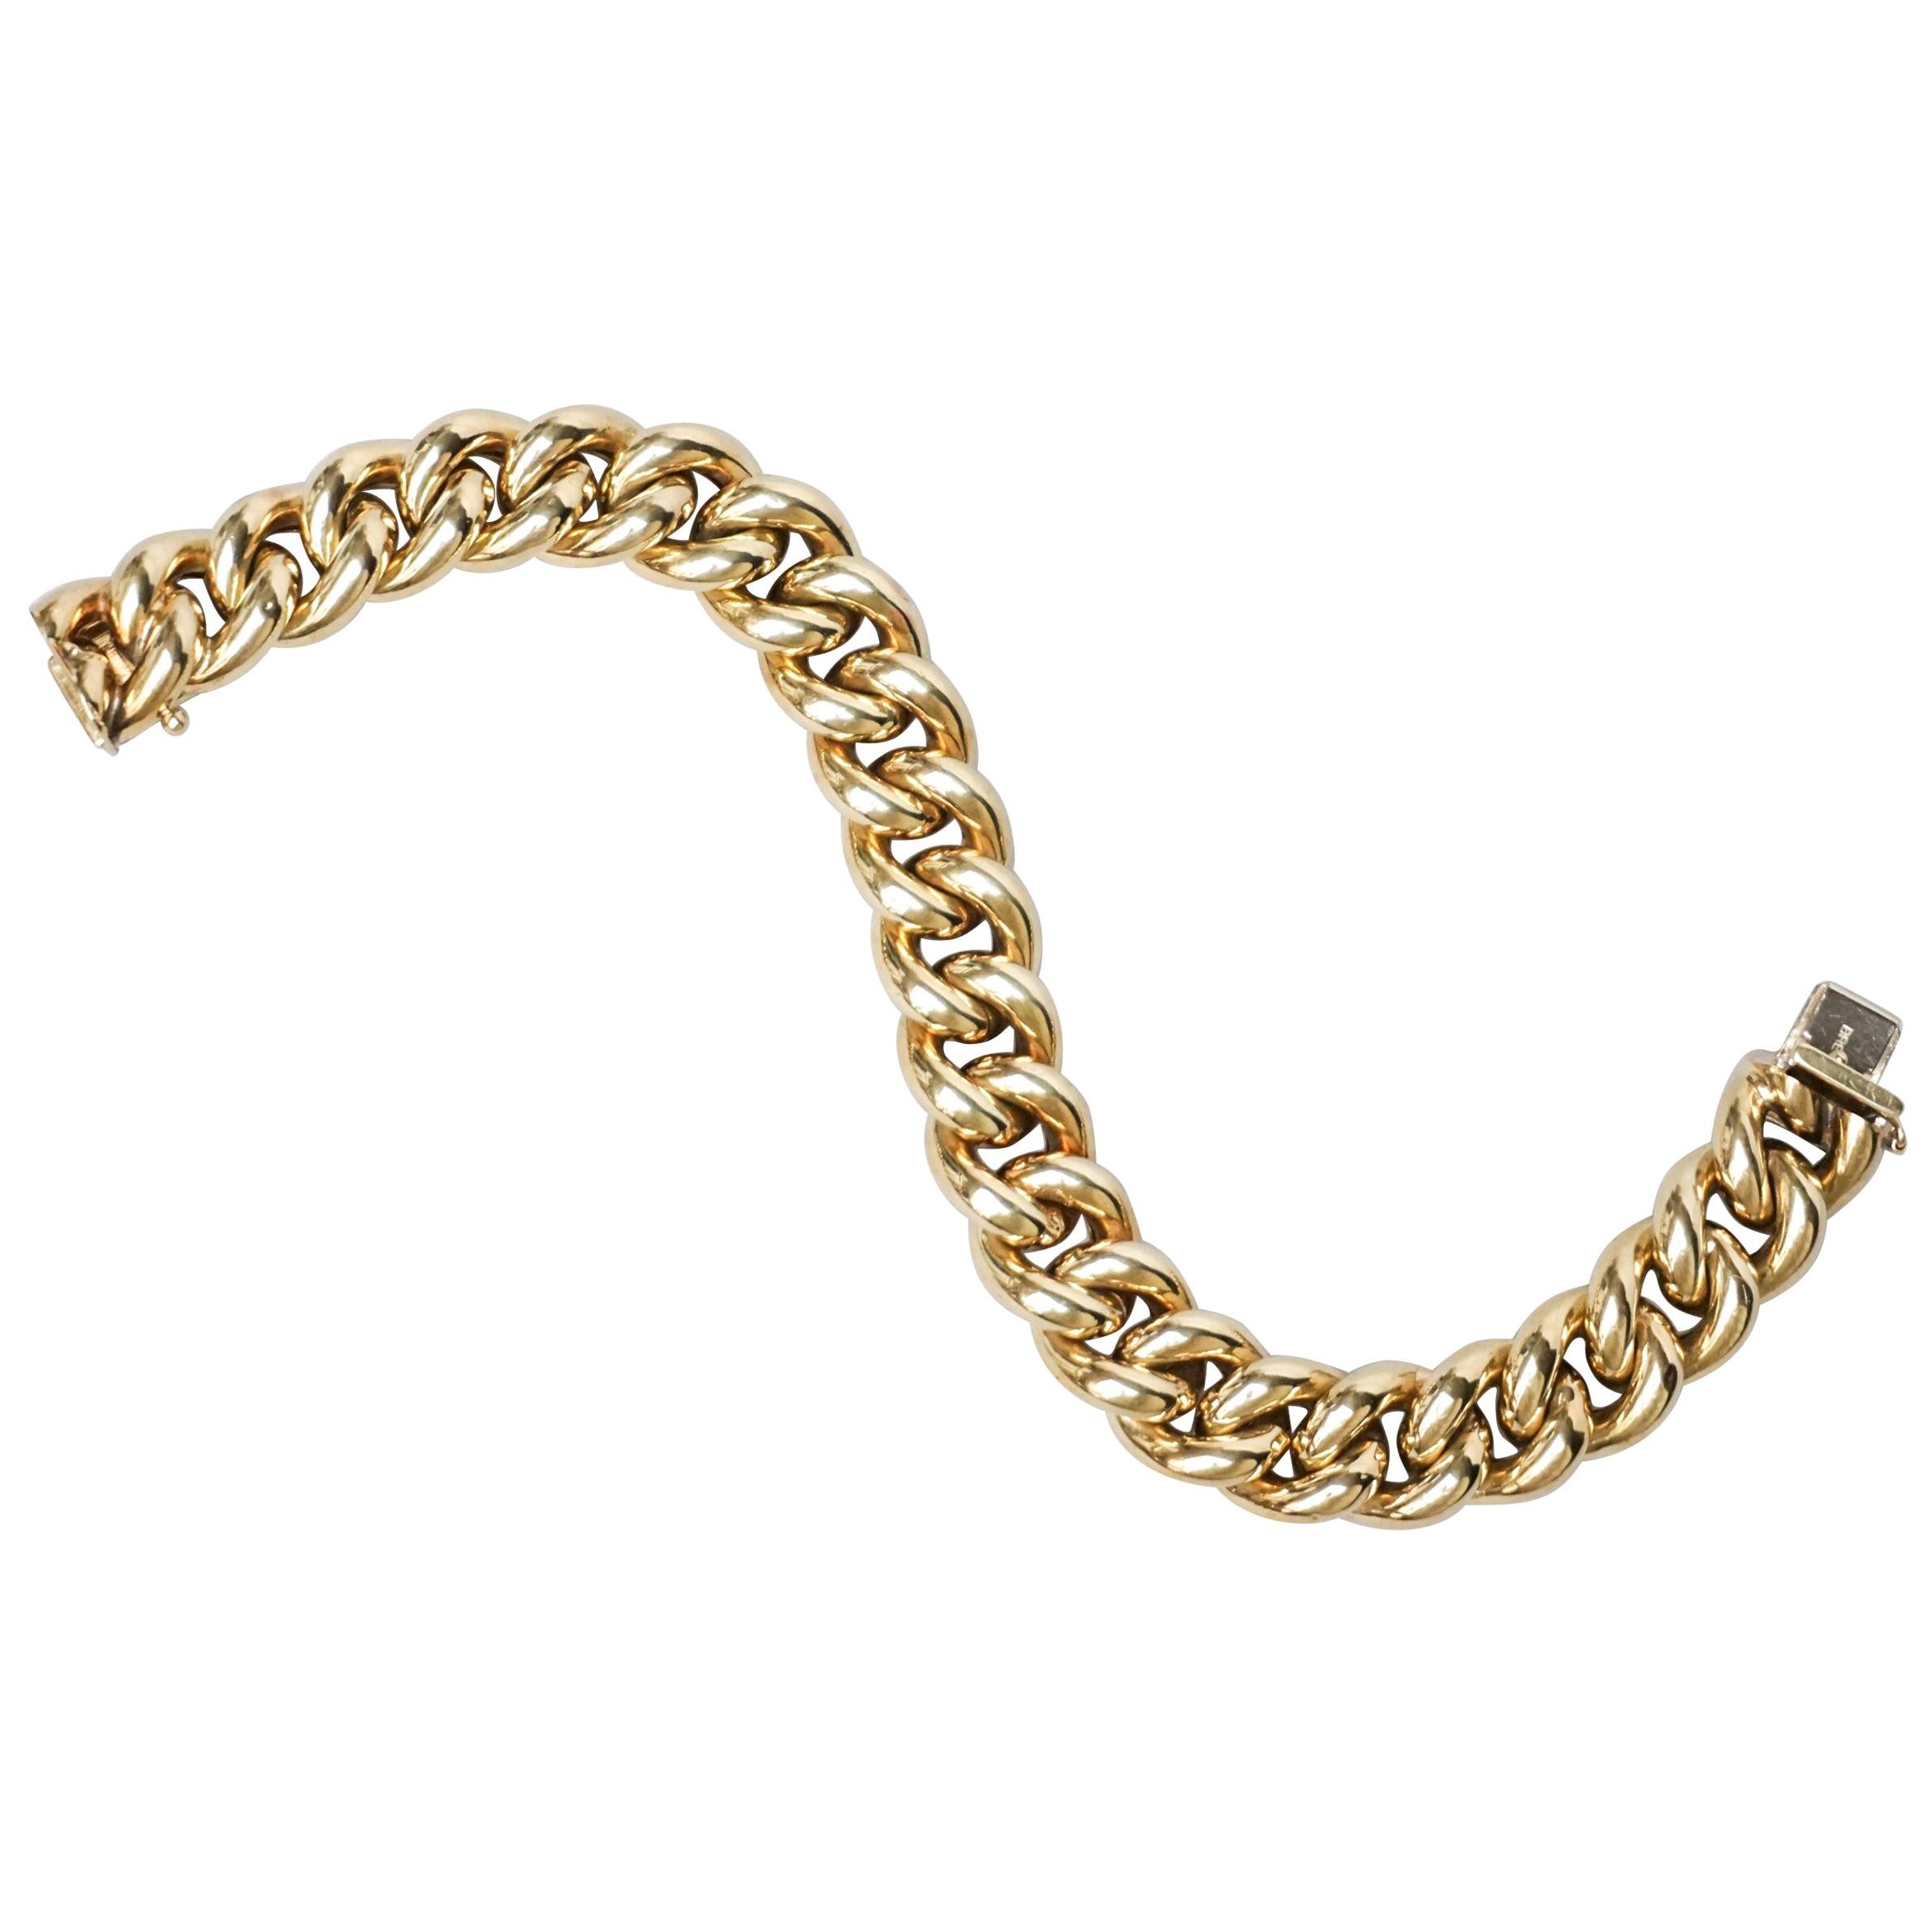 Vintage v bracelet in 14Kt gold with a herringbone pattern made in Italy,circa 1970